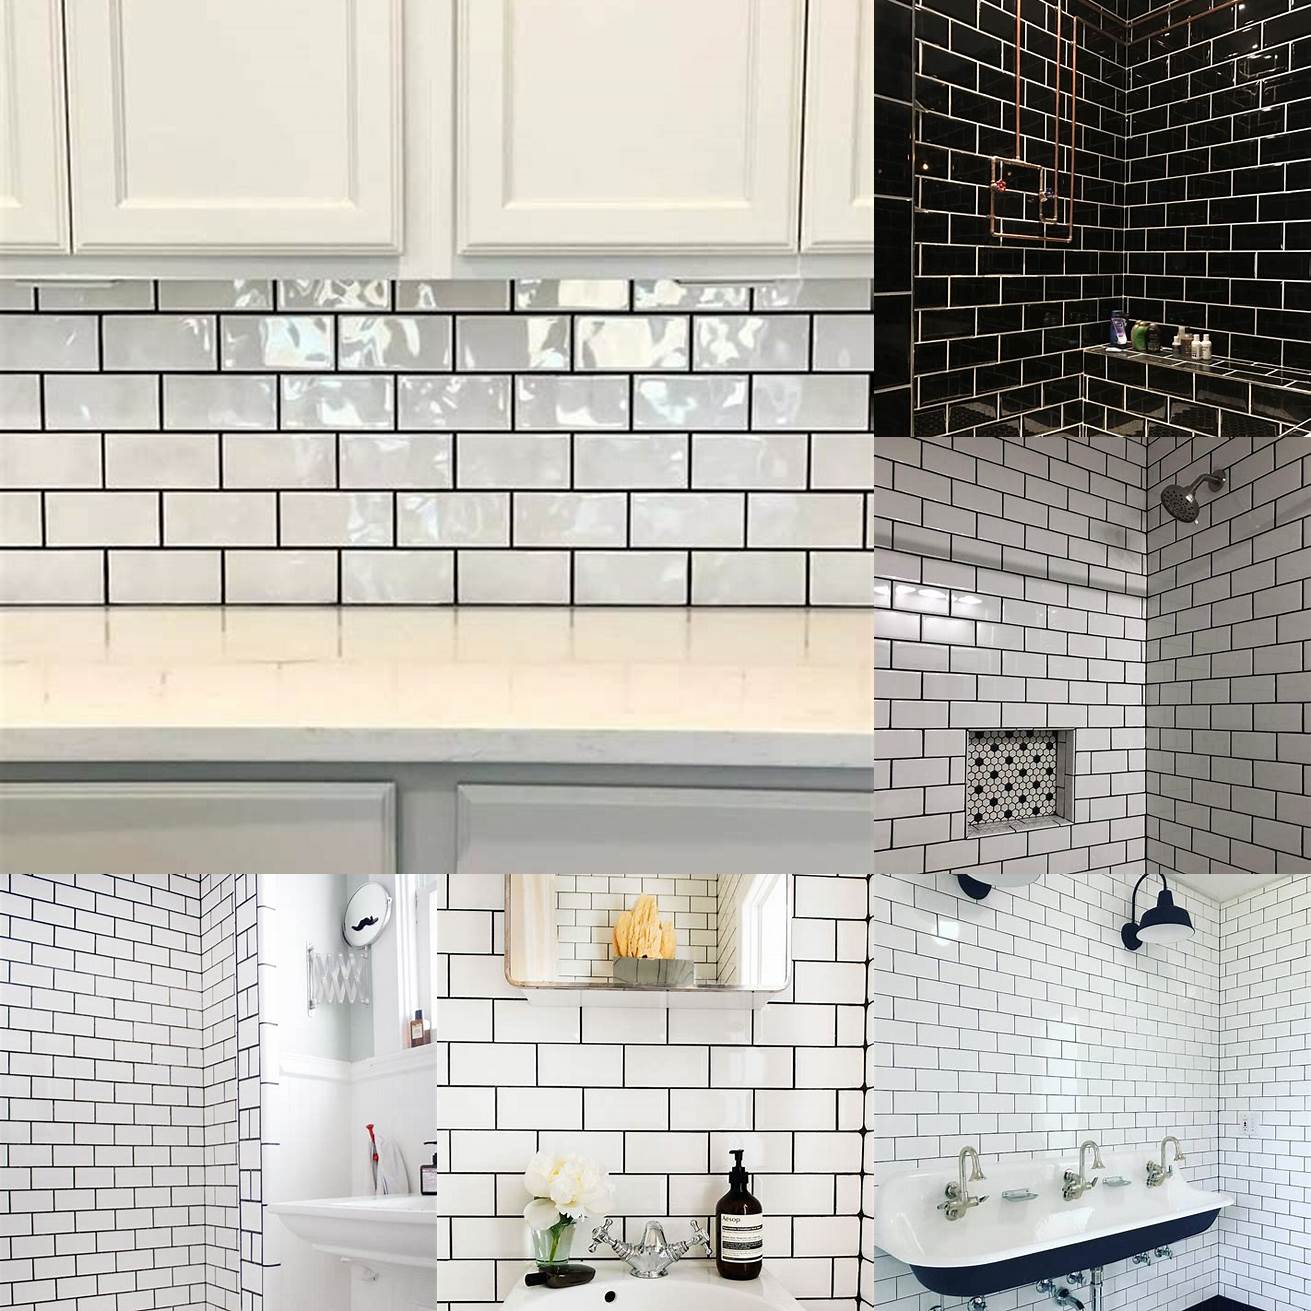 Classic white subway tiles with black grout